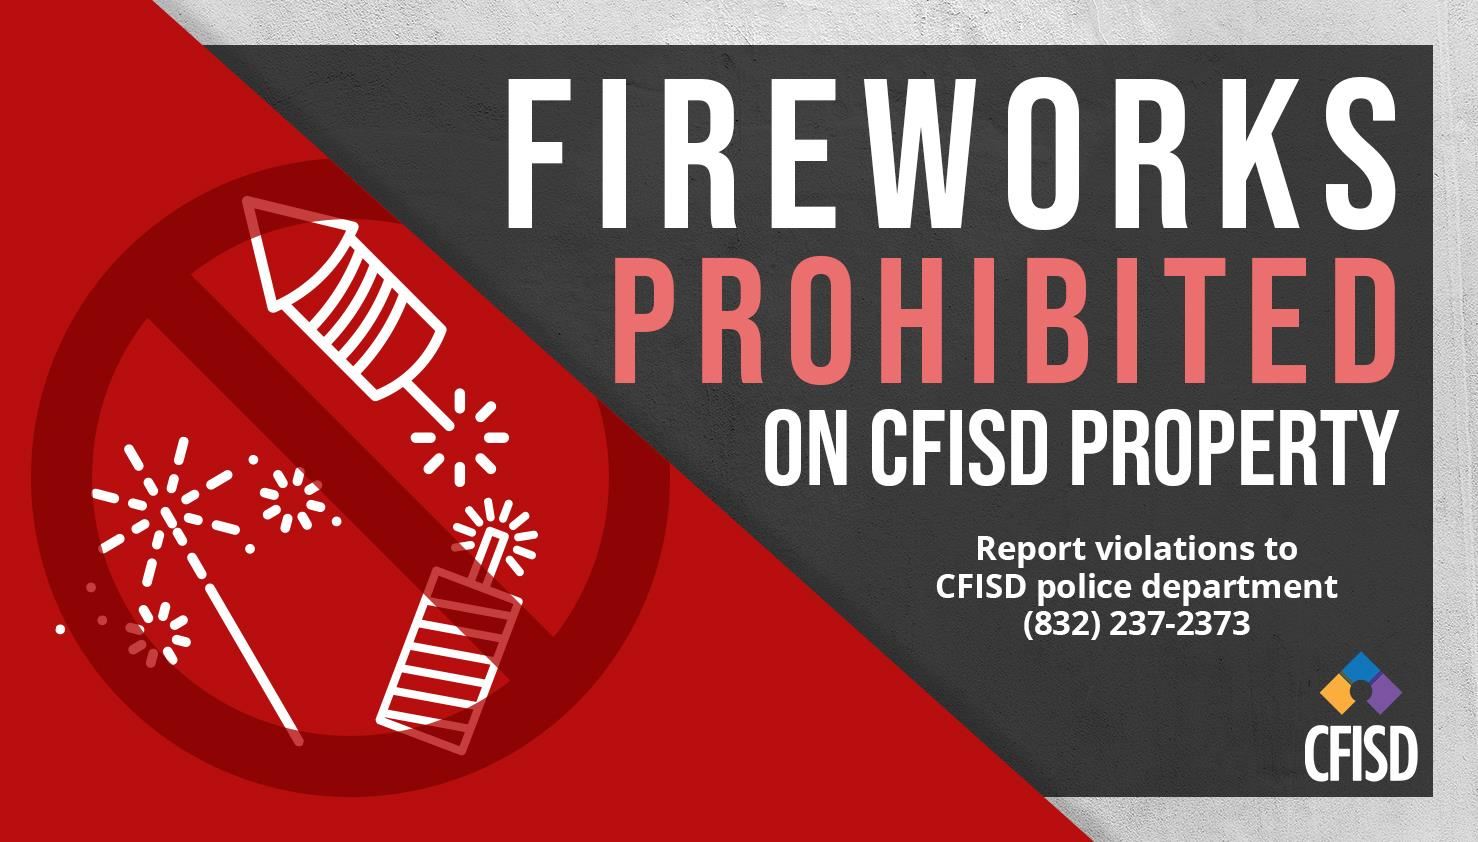 CFISD reminds those celebrating the upcoming New Year’s holiday that Texas law prohibits fireworks.